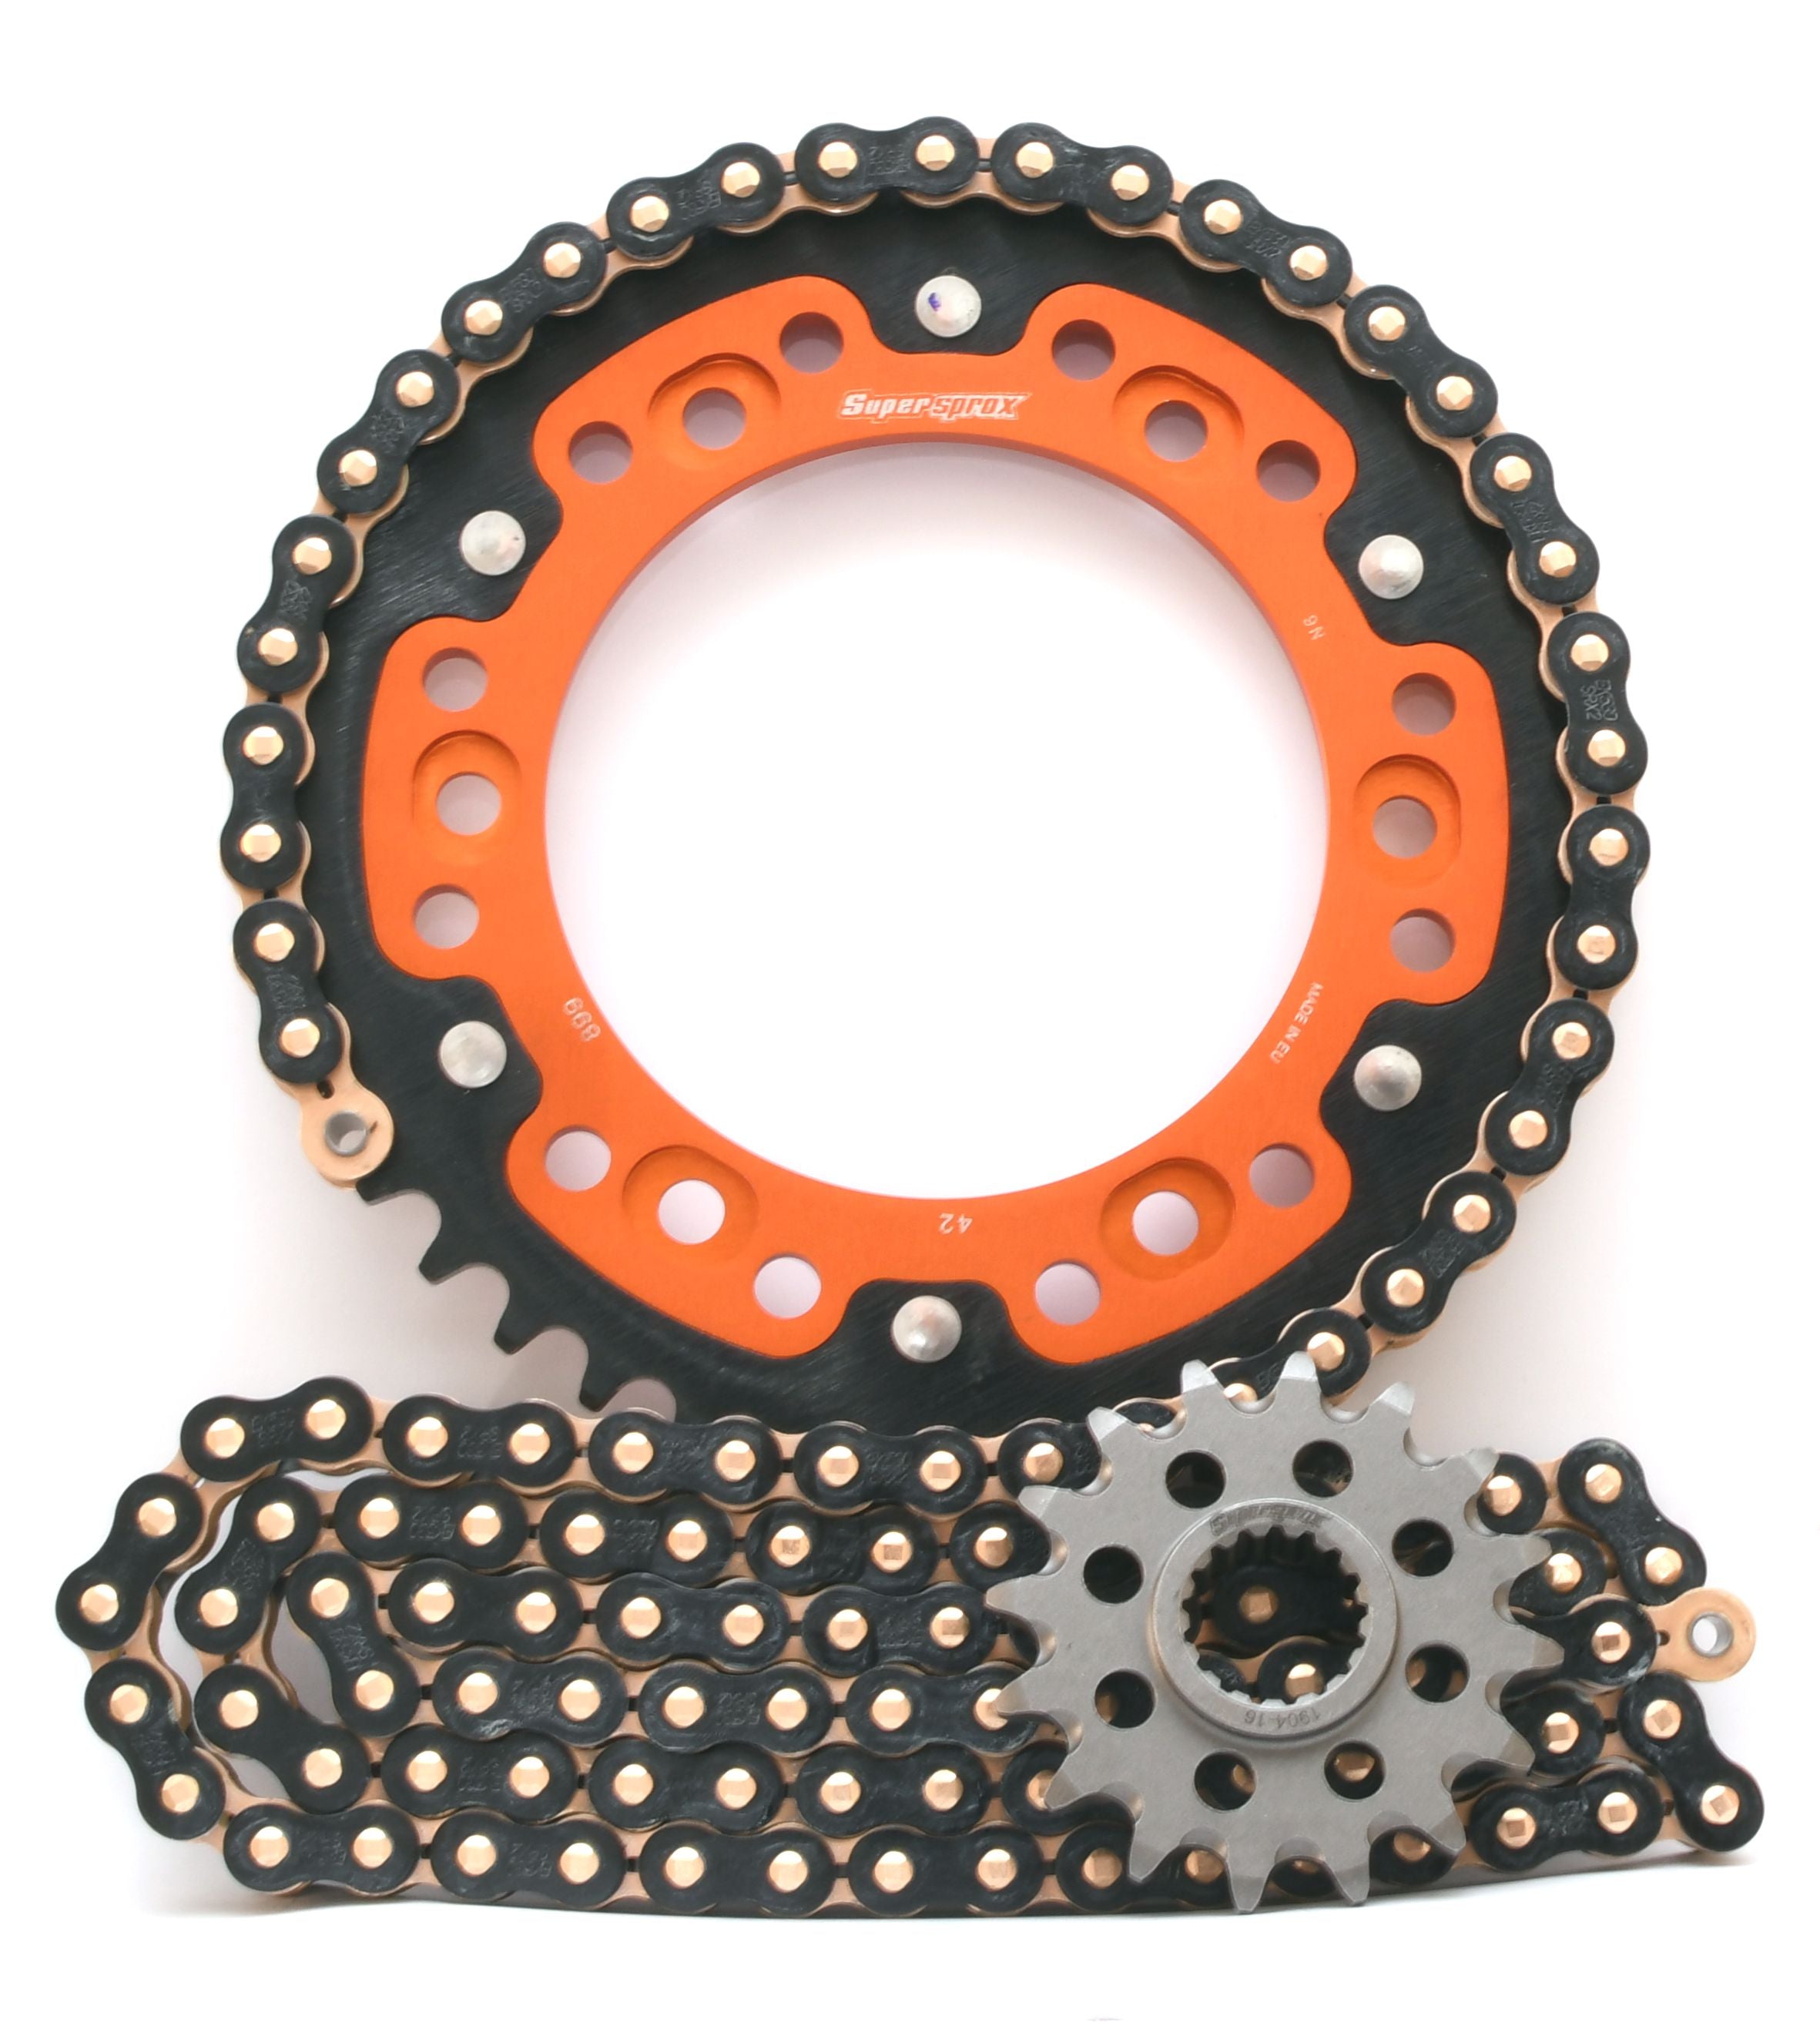 Supersprox Chain & Sprocket Kit for KTM 950 Super Enduro R 06-10 - Choose Your Gearing - 0